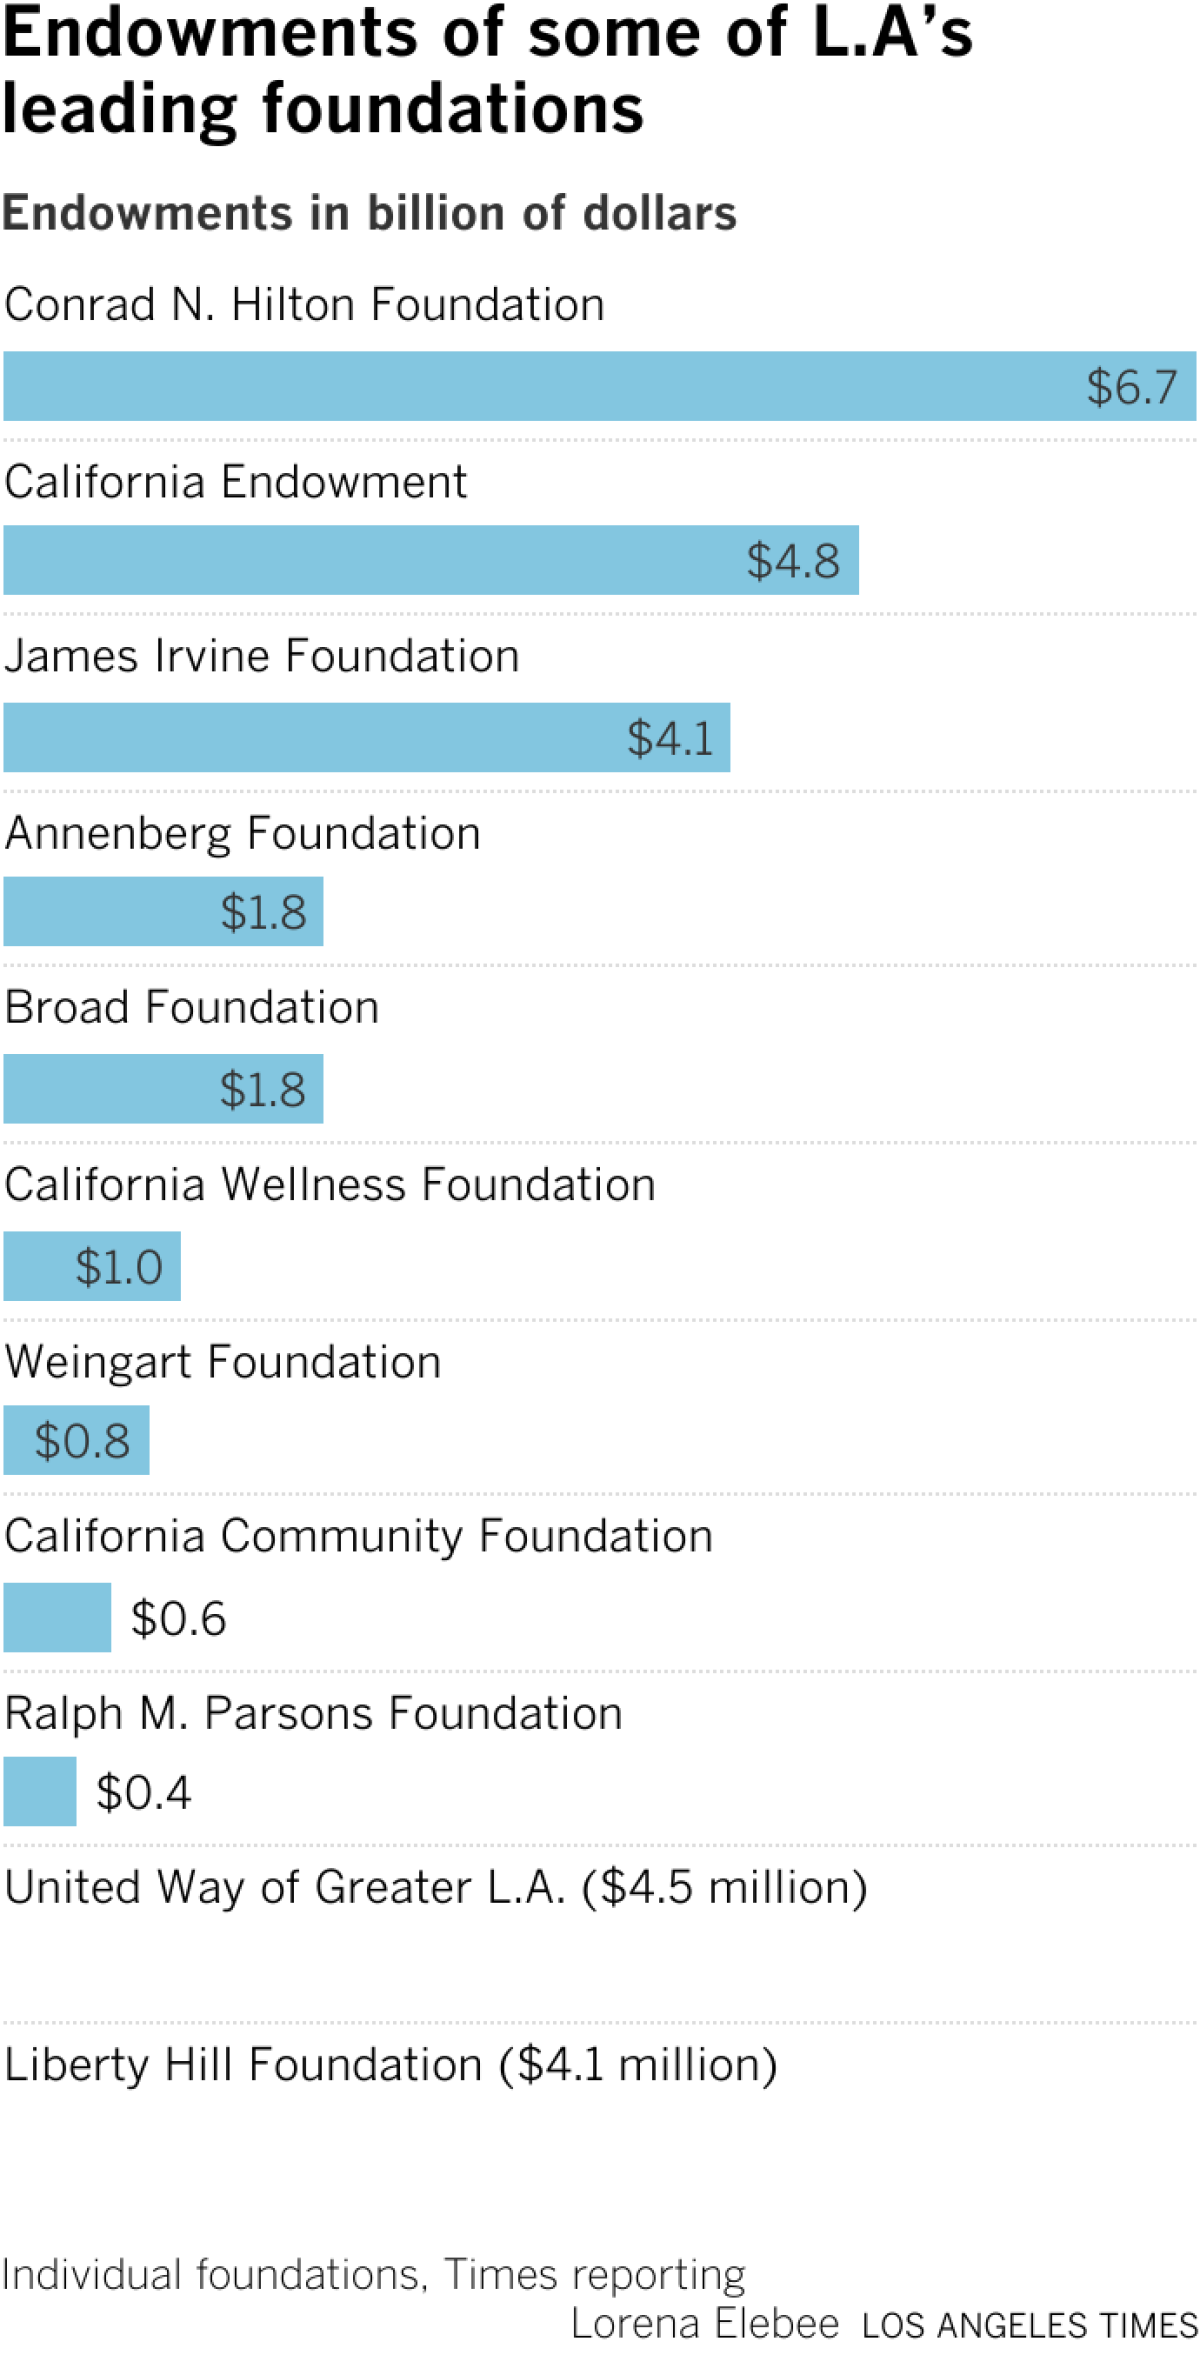 Endowments of some of L.A’s leading foundations